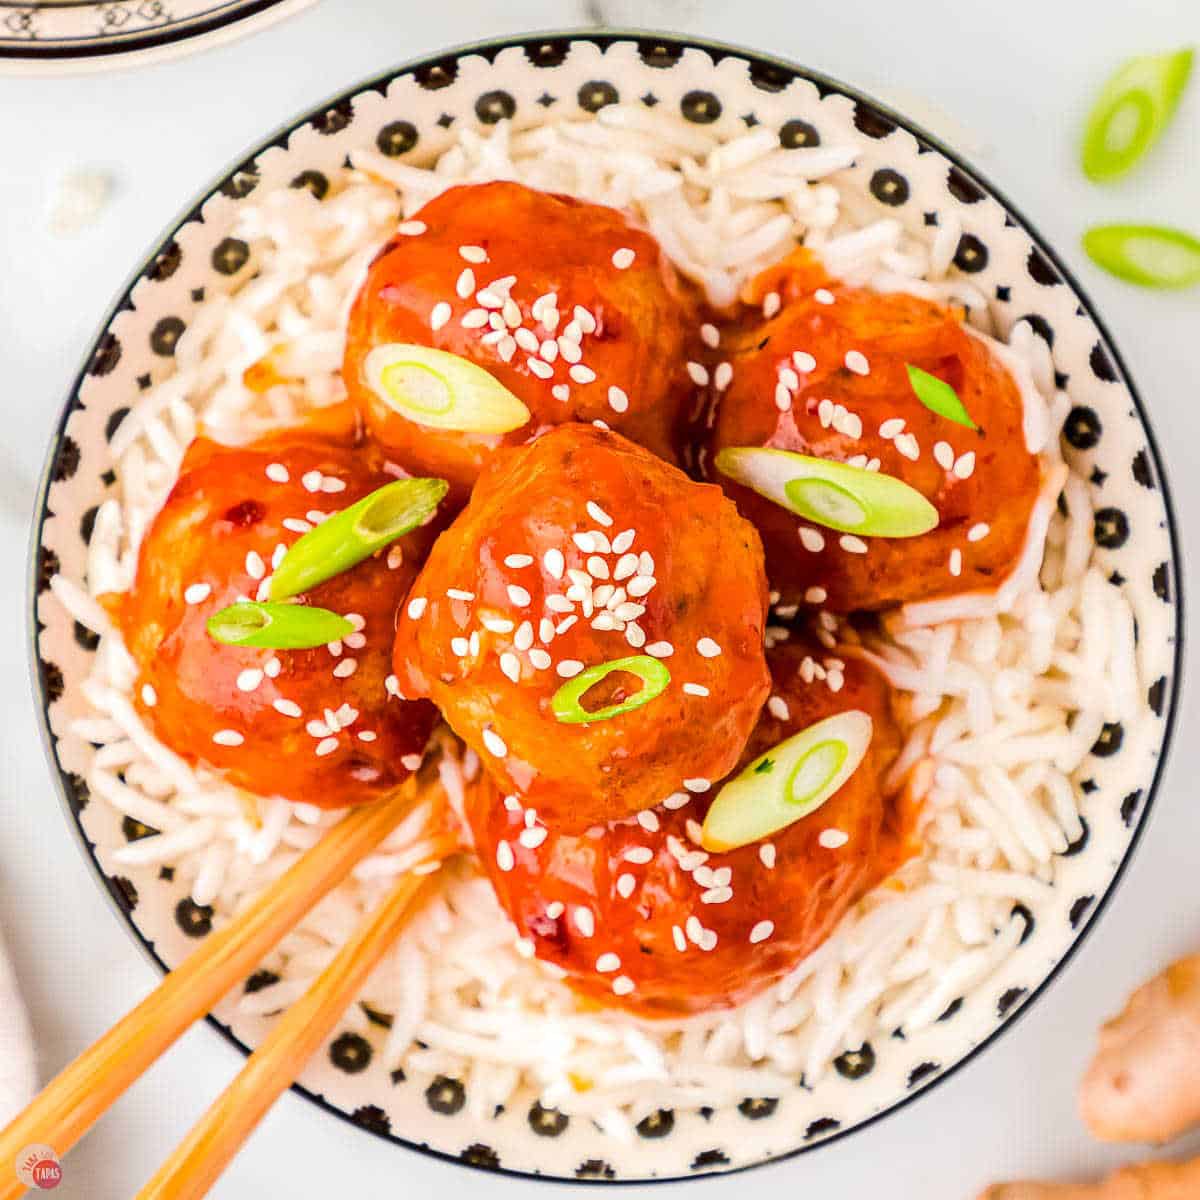 chopstick with meatball over a bowl of rice